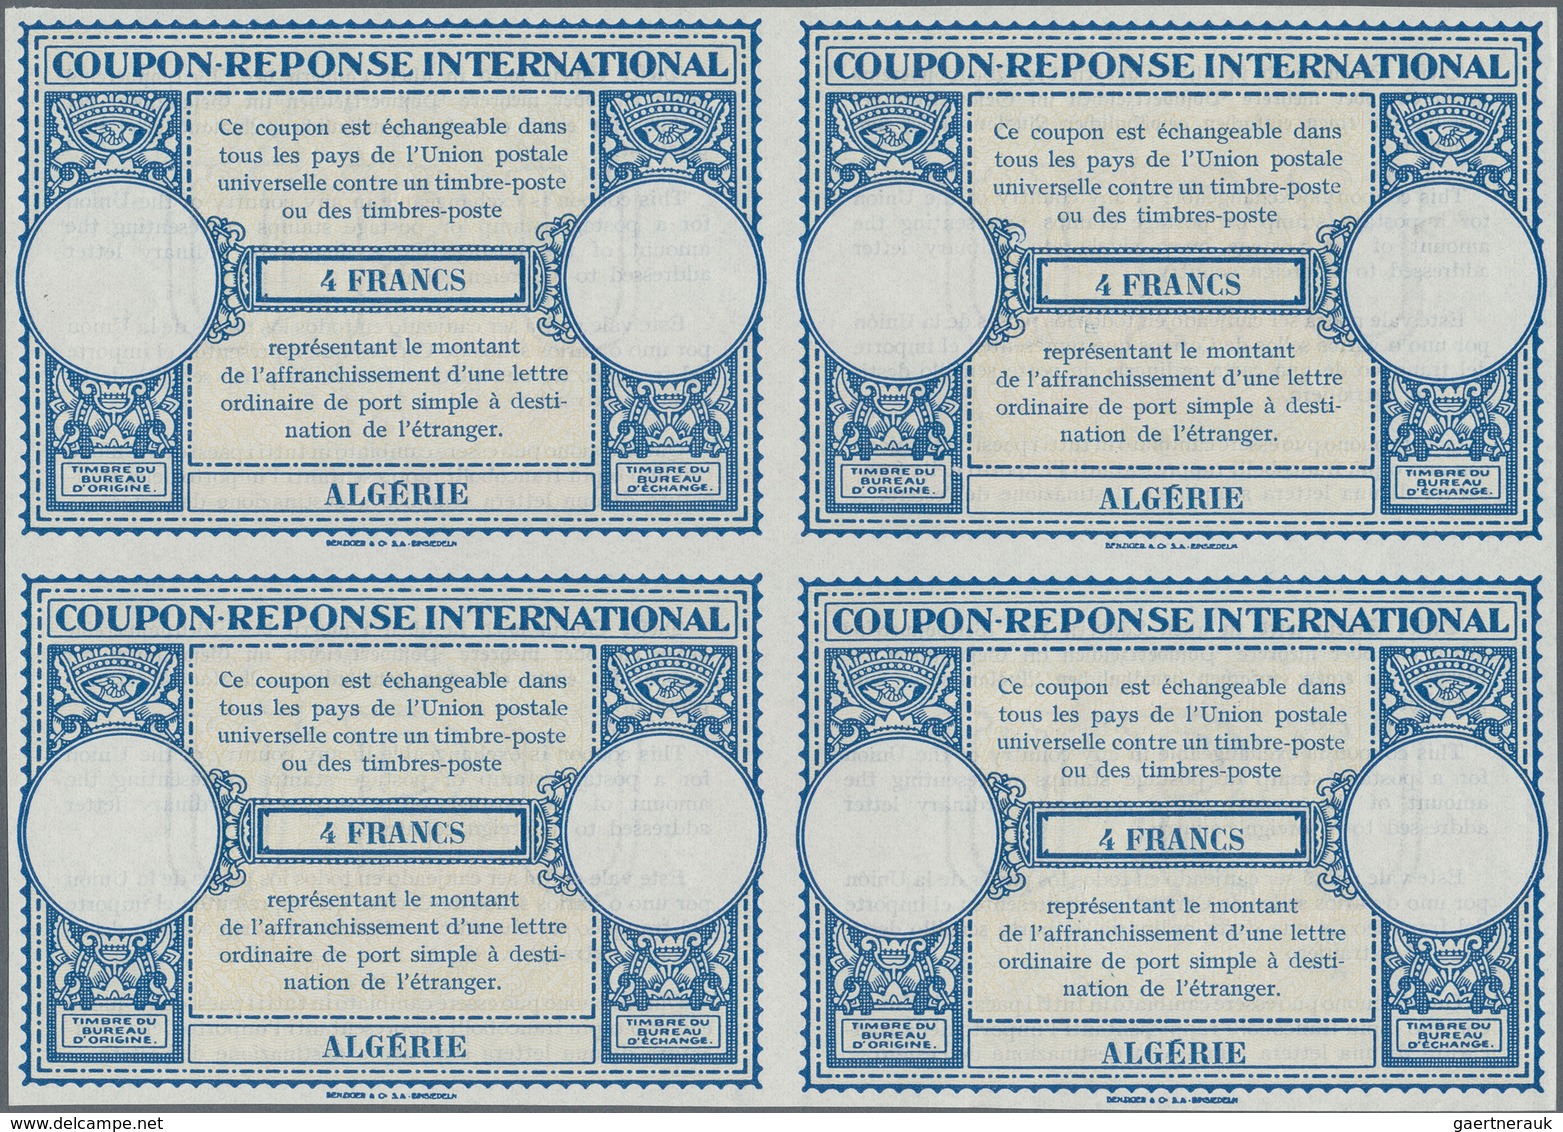 Algerien: 1940s (approx). International Reply Coupon 4 Francs (London Type) In An Unused Block Of 4. - Briefe U. Dokumente